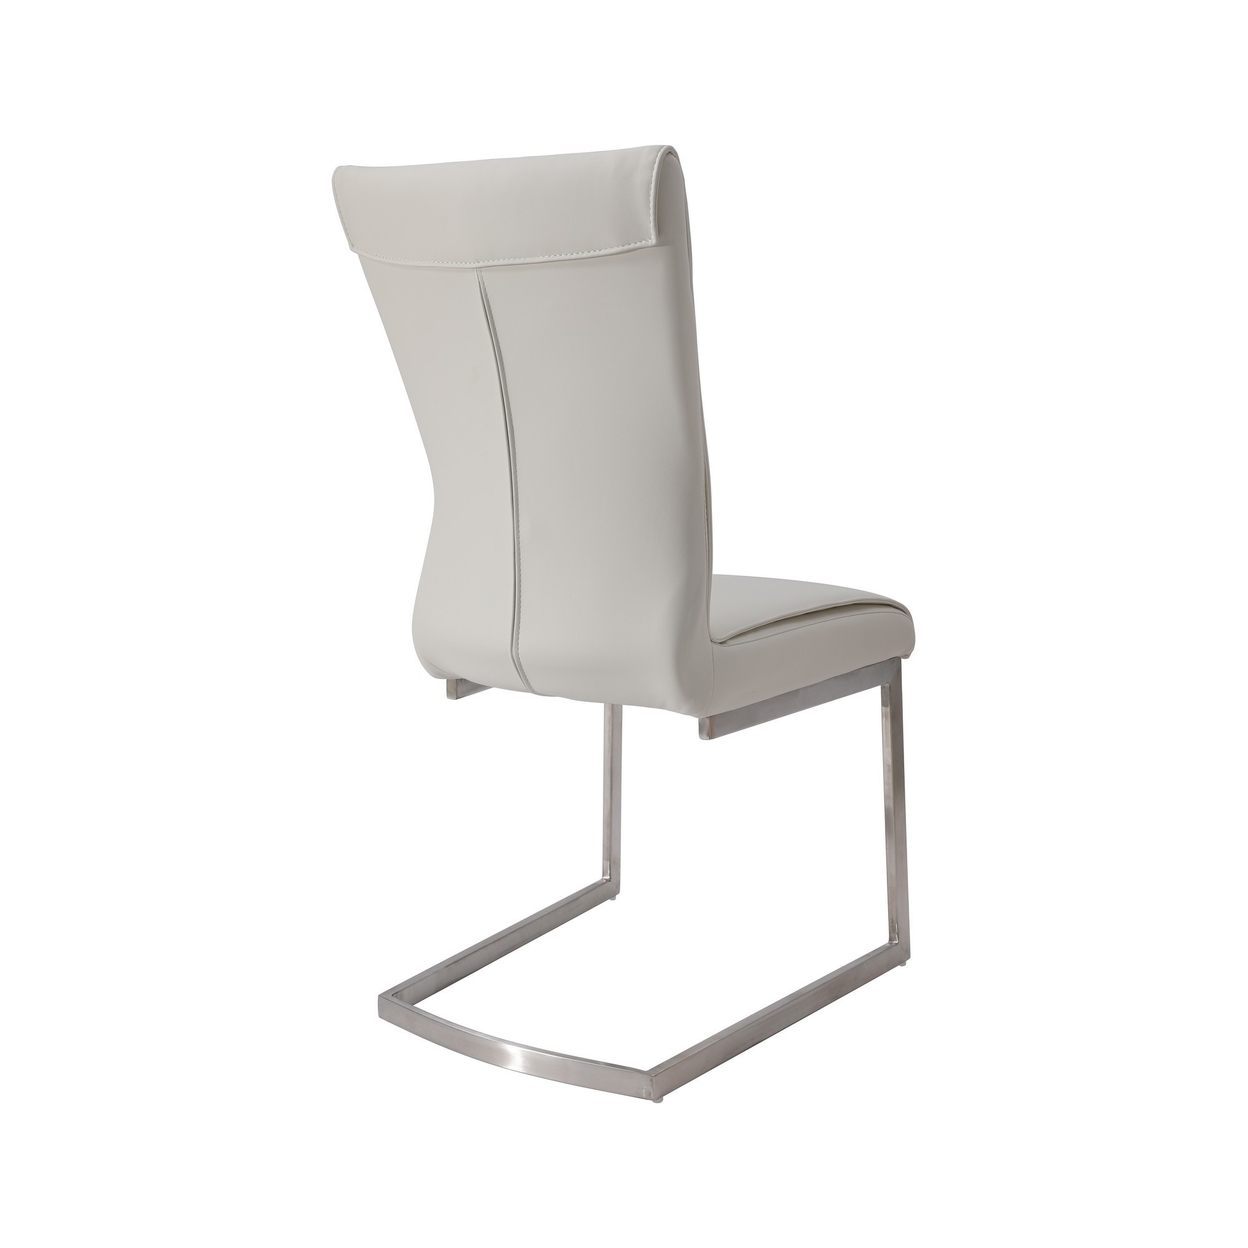 Leatherette Dining Chair With Breuer Base, White - Saltoro Sherpi